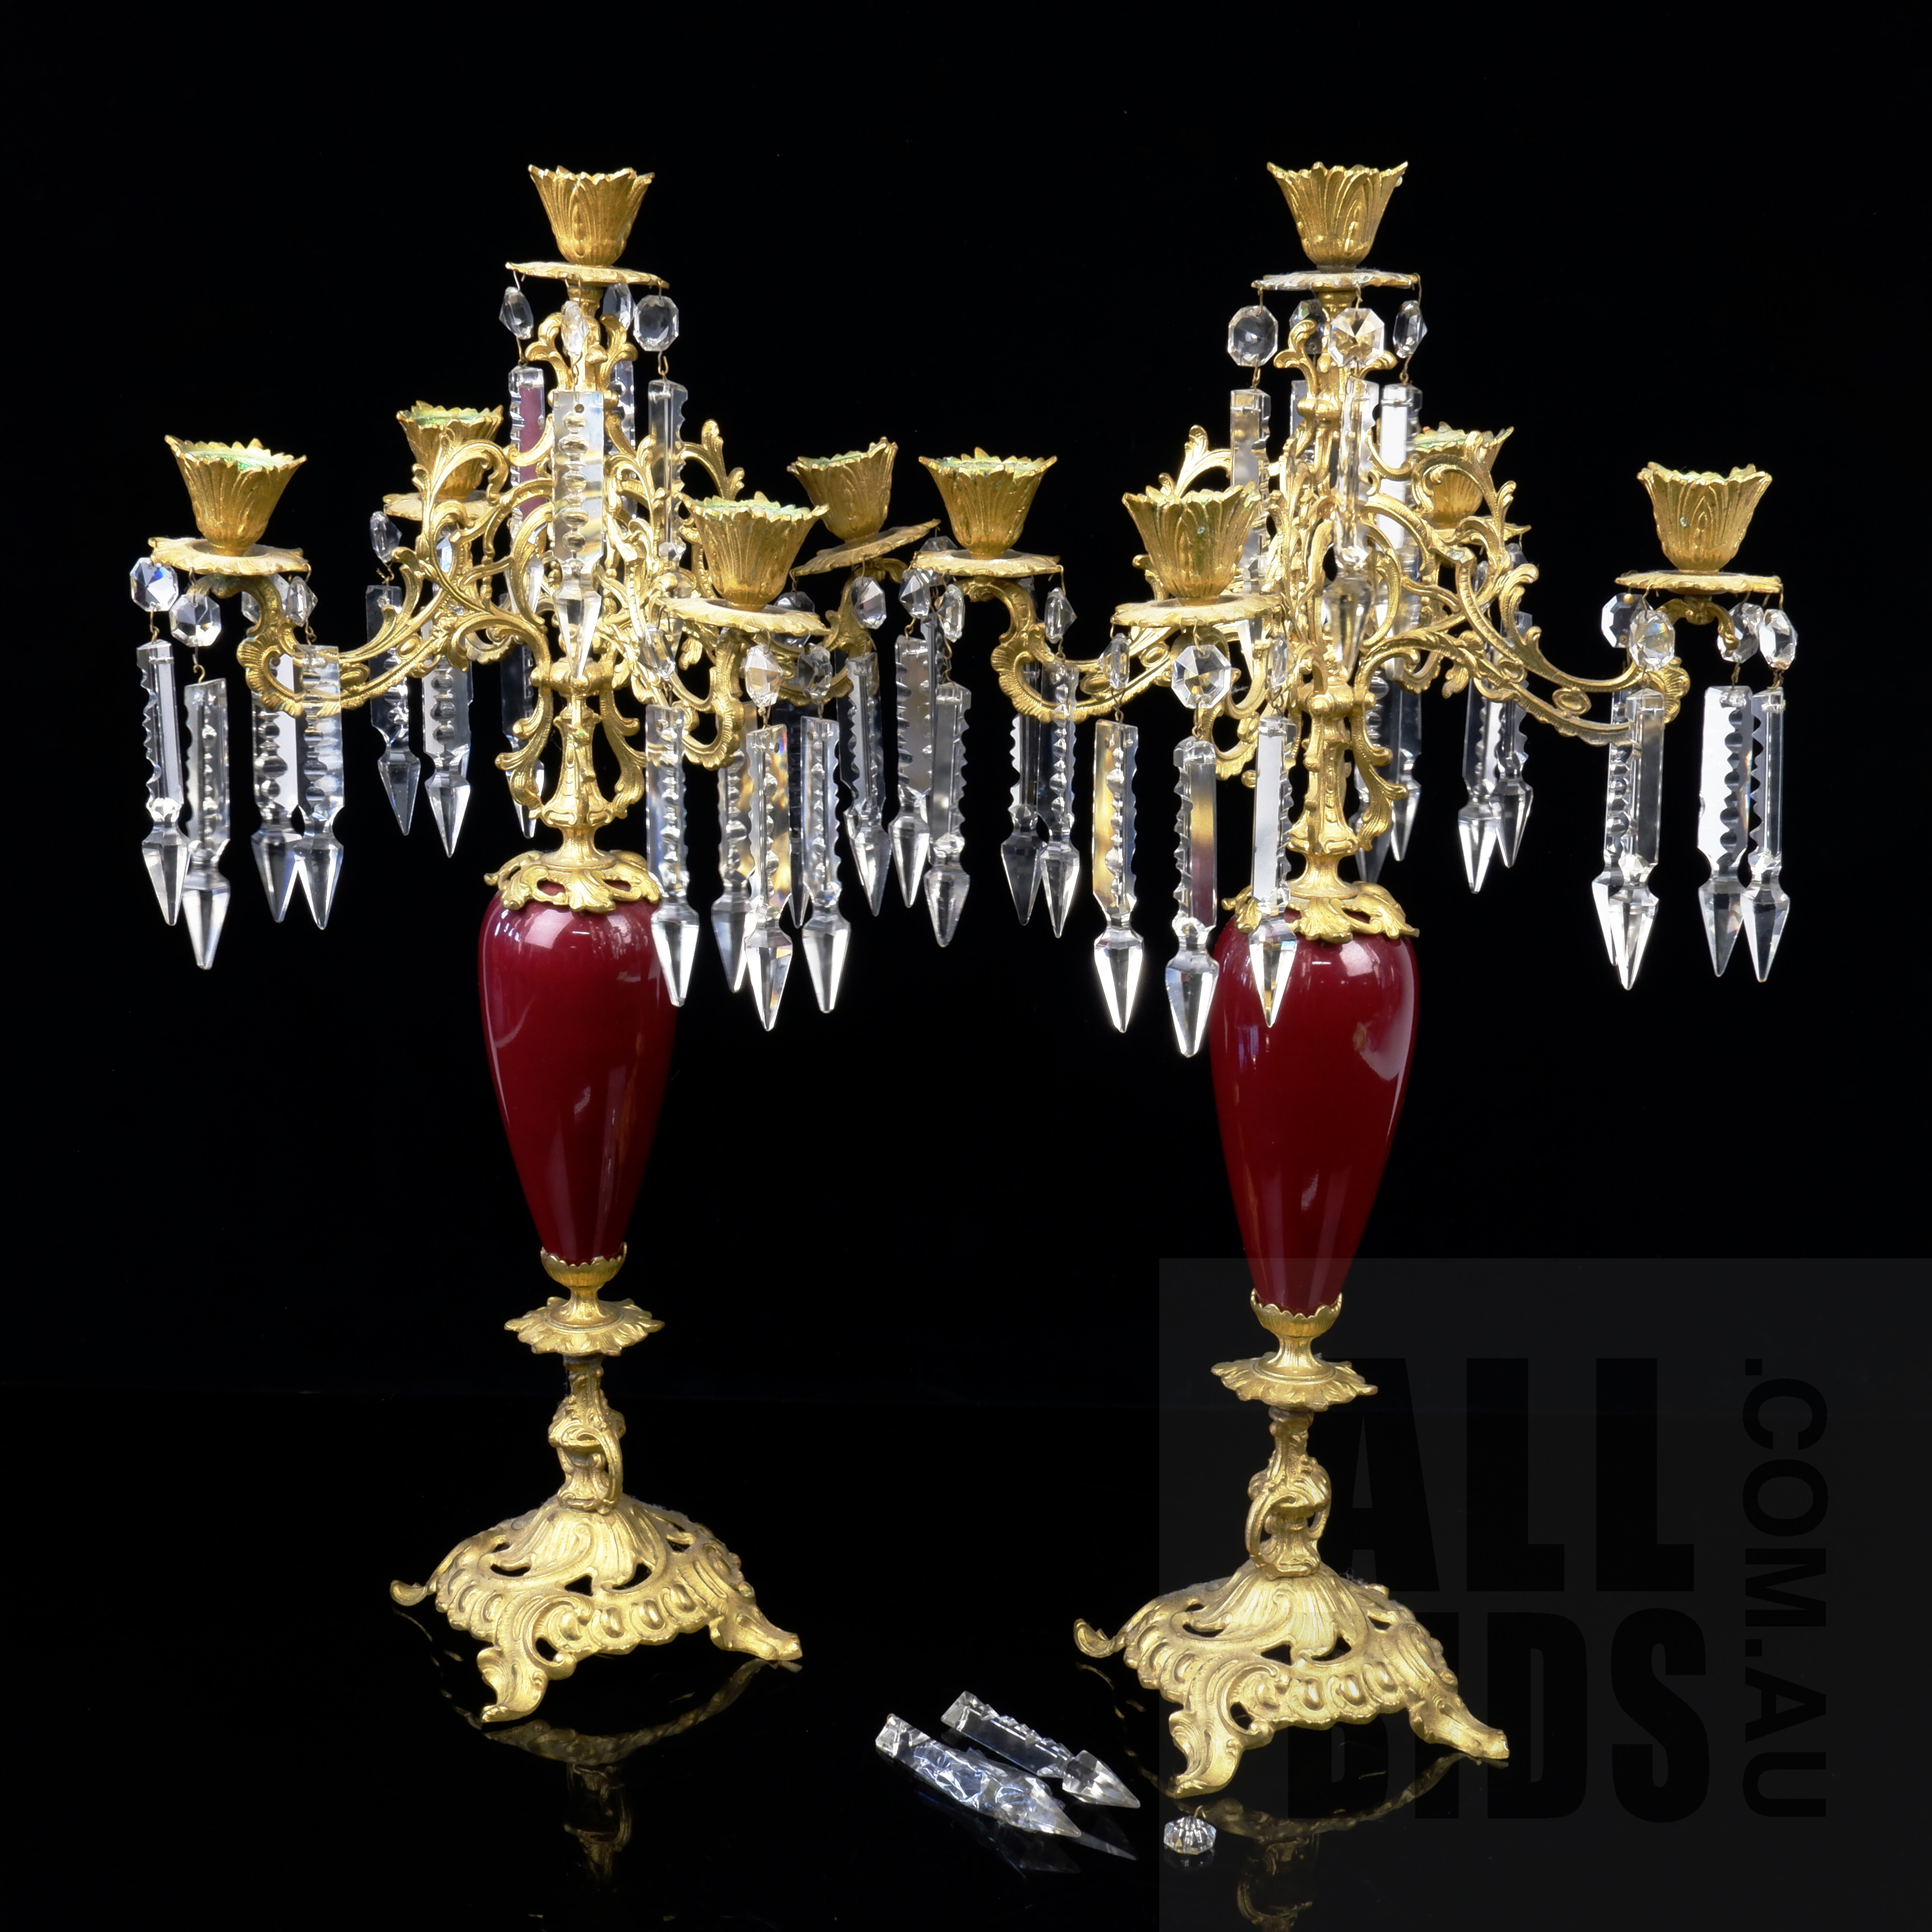 'Good Pair of Antique Style Swedish Gilt Metal and Glass Candelabras with Prism Drops'